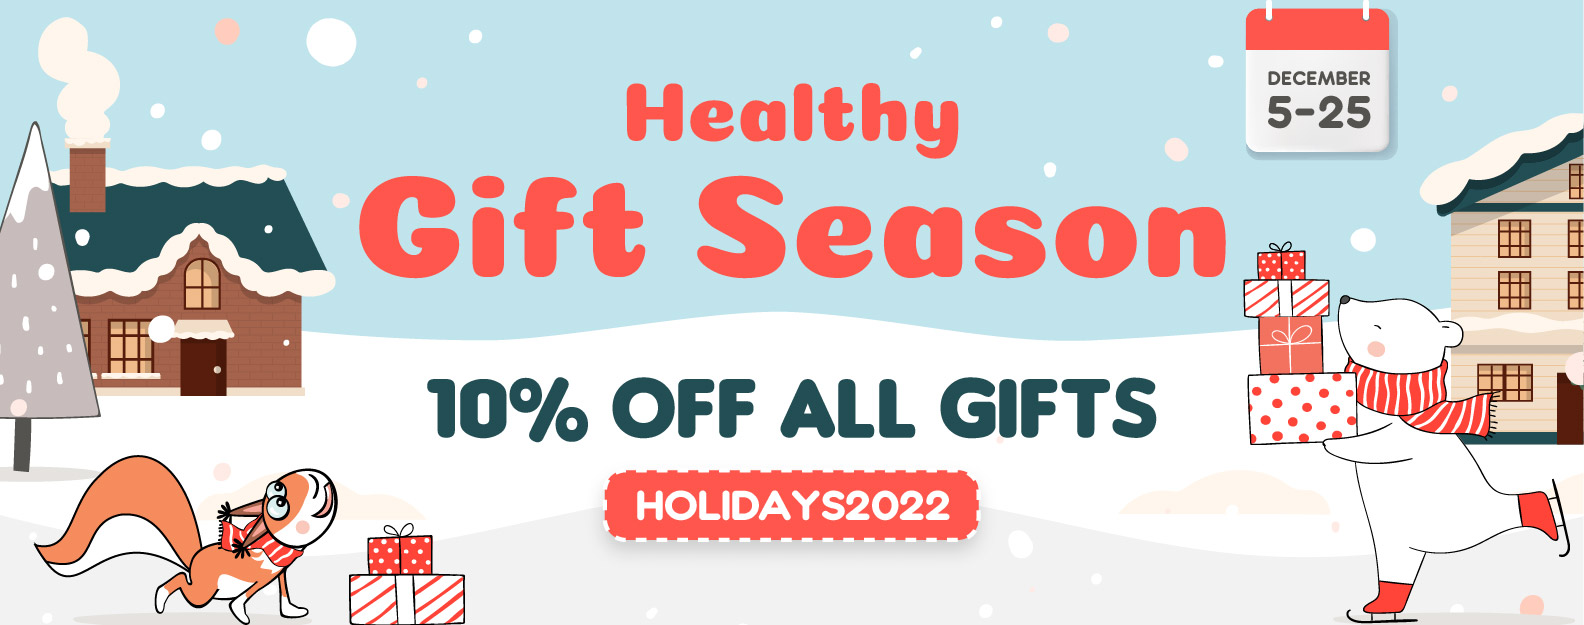 10% OFF ALL GIFTS use promocode holidays2022